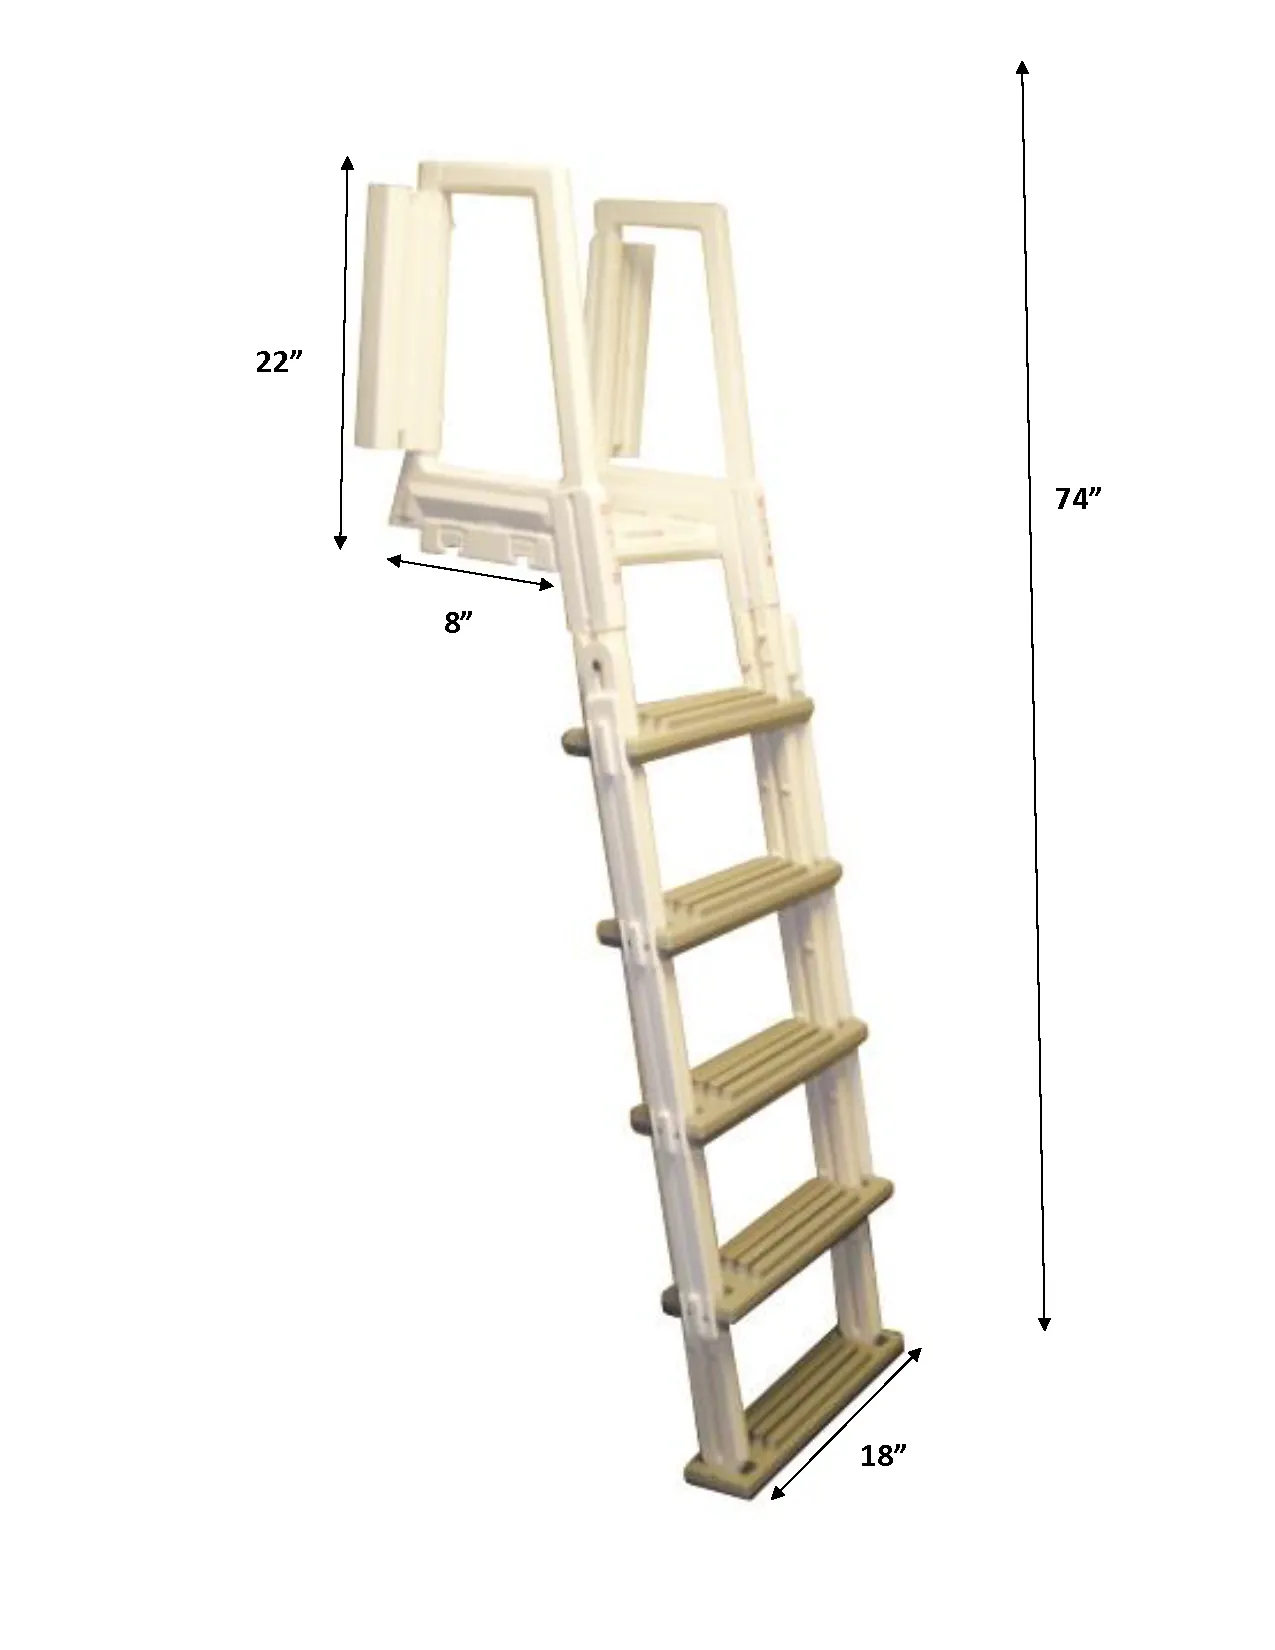 Outside Ladder Dimensions